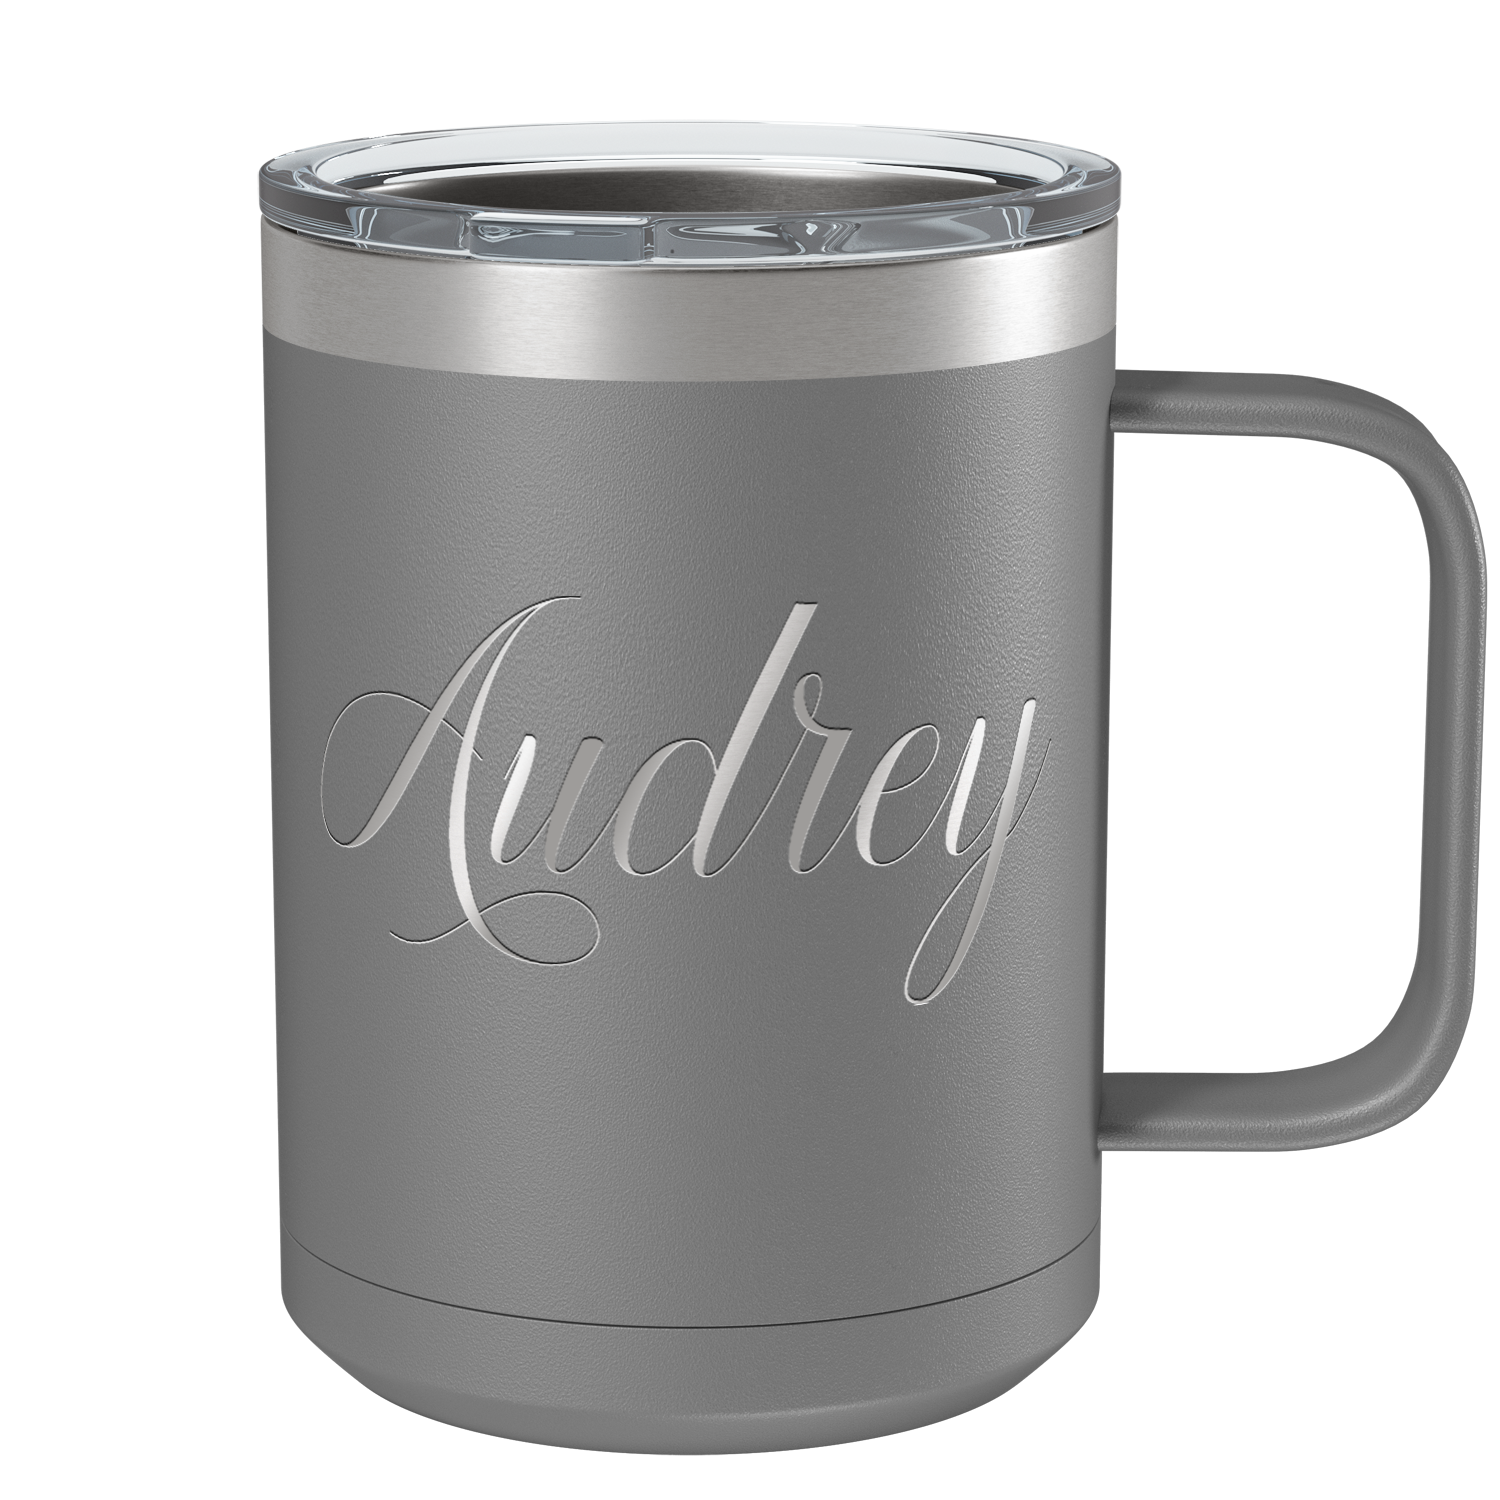 Cuptify Personalized Engraved 15 oz Stainless Steel Coffee Mug - Slate